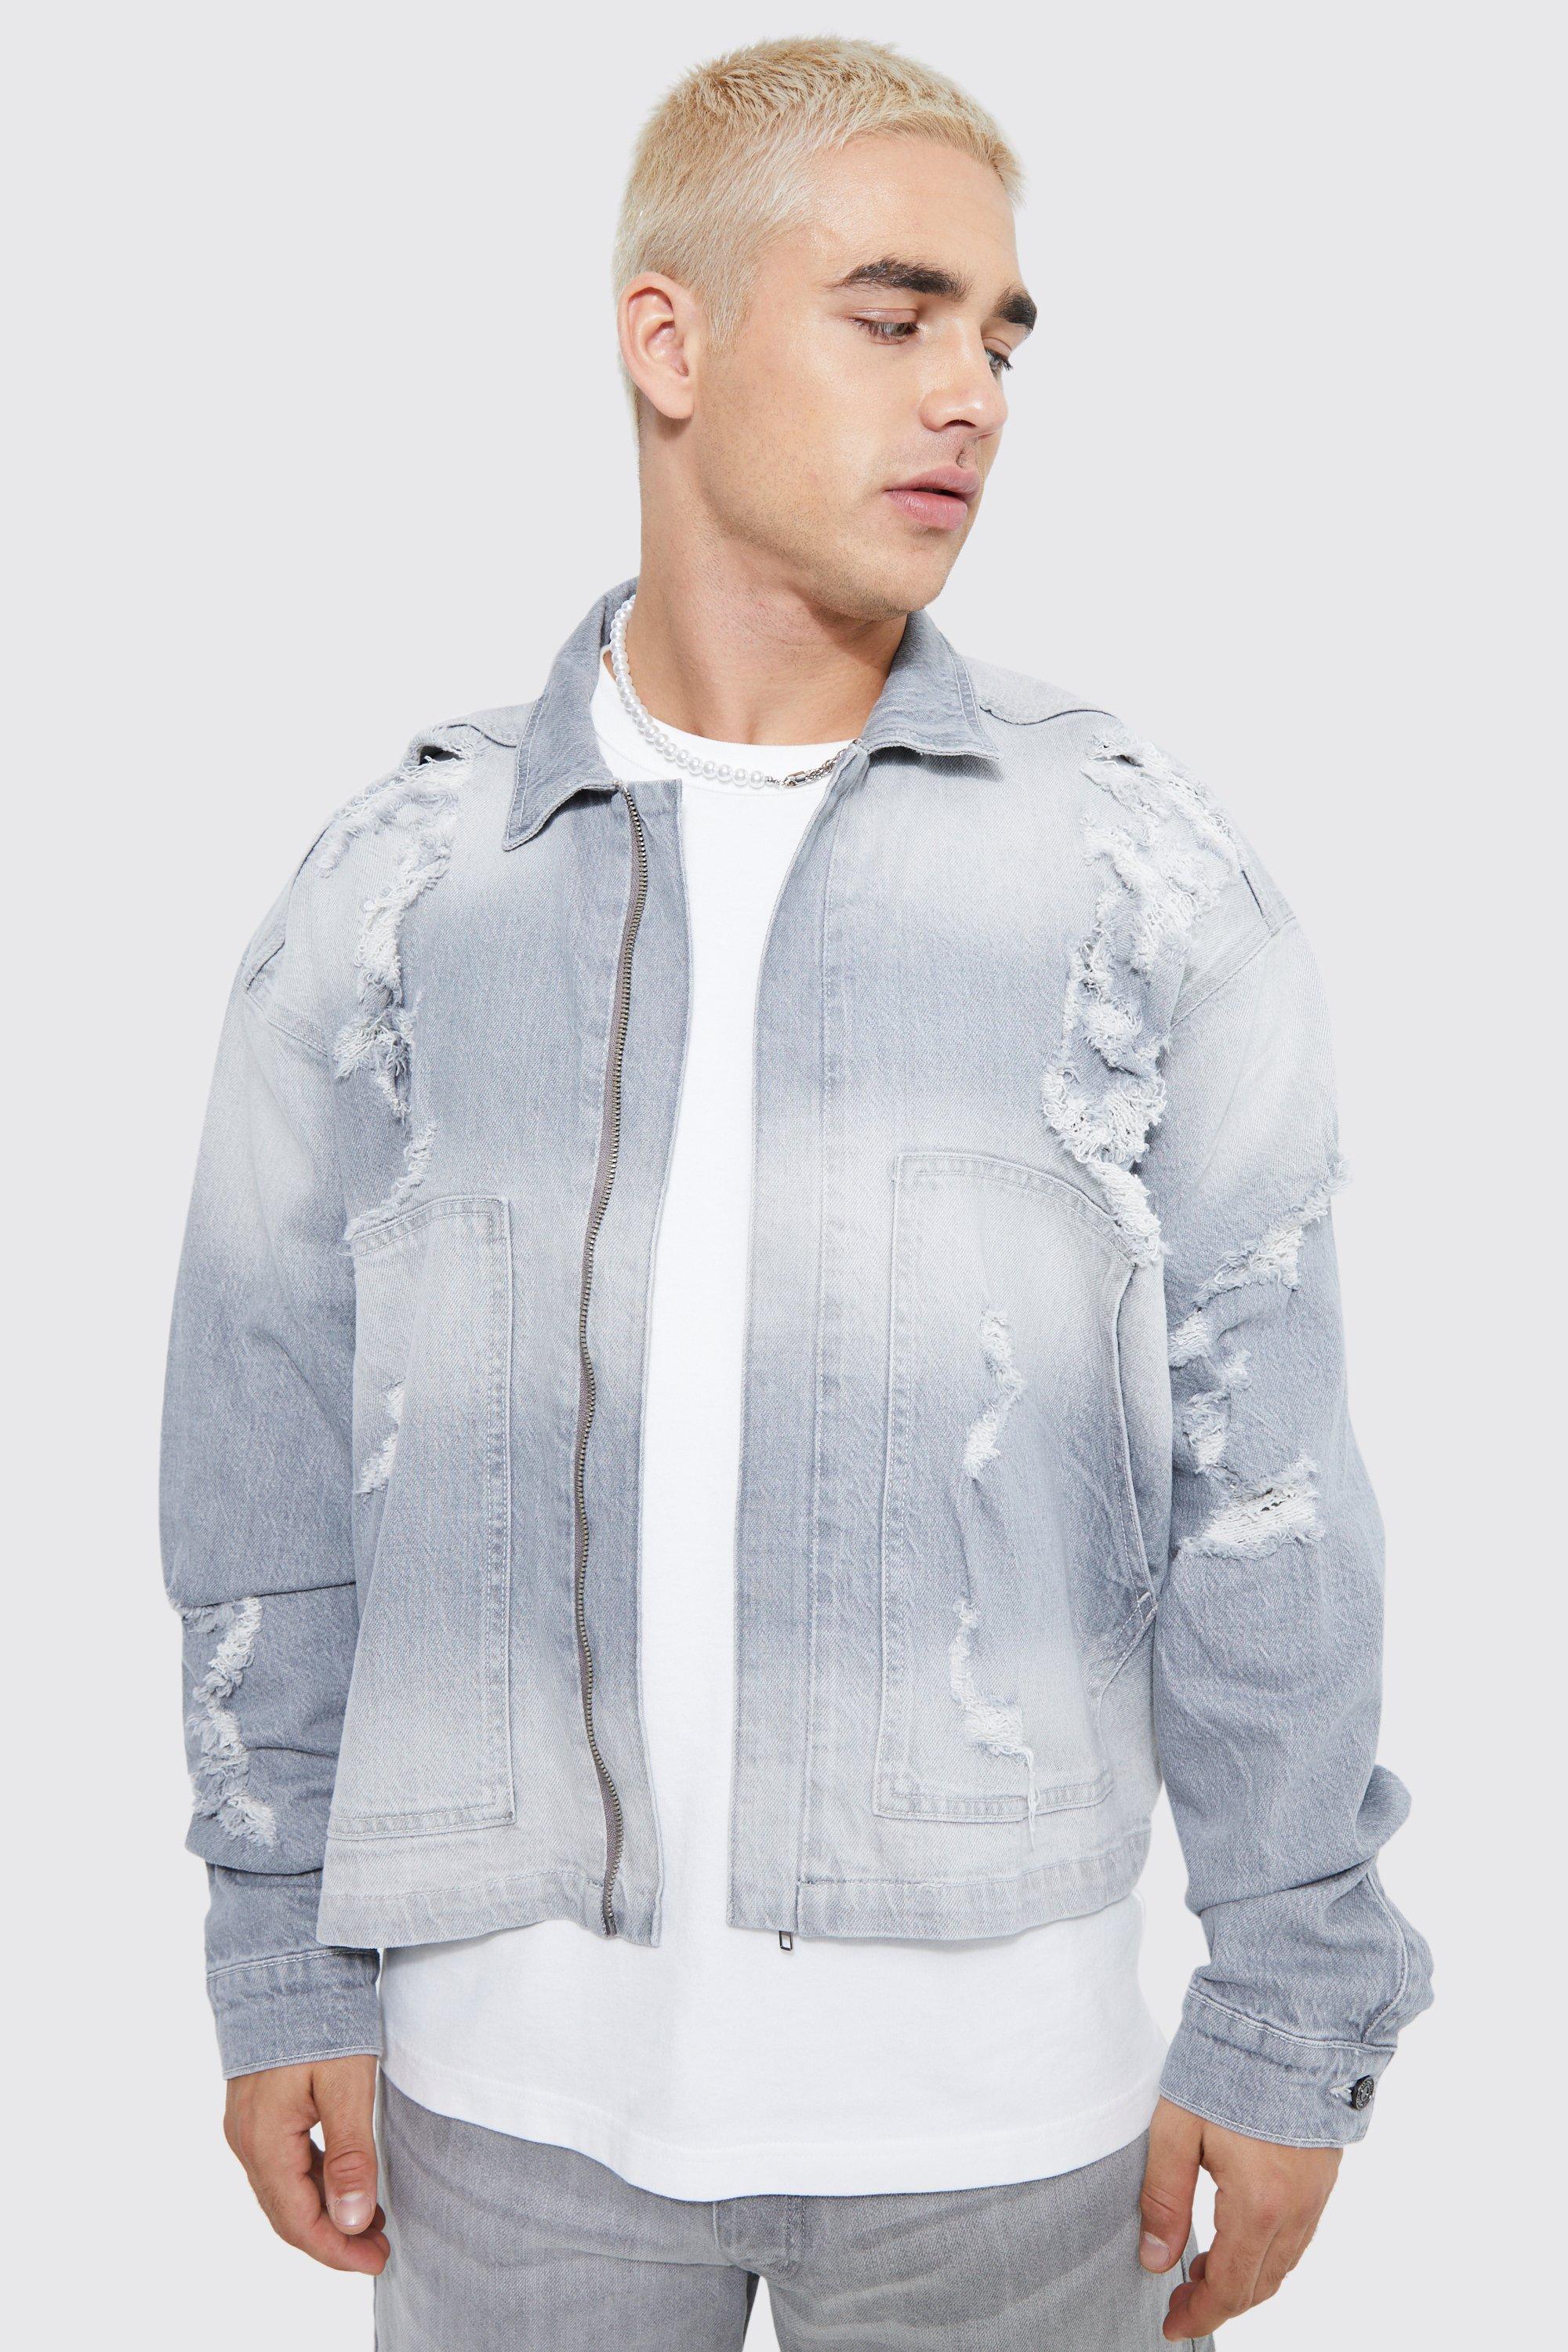 Boohoo Oversized Boxy Fit Distressed Denim Jacket in Blue | Lyst Canada